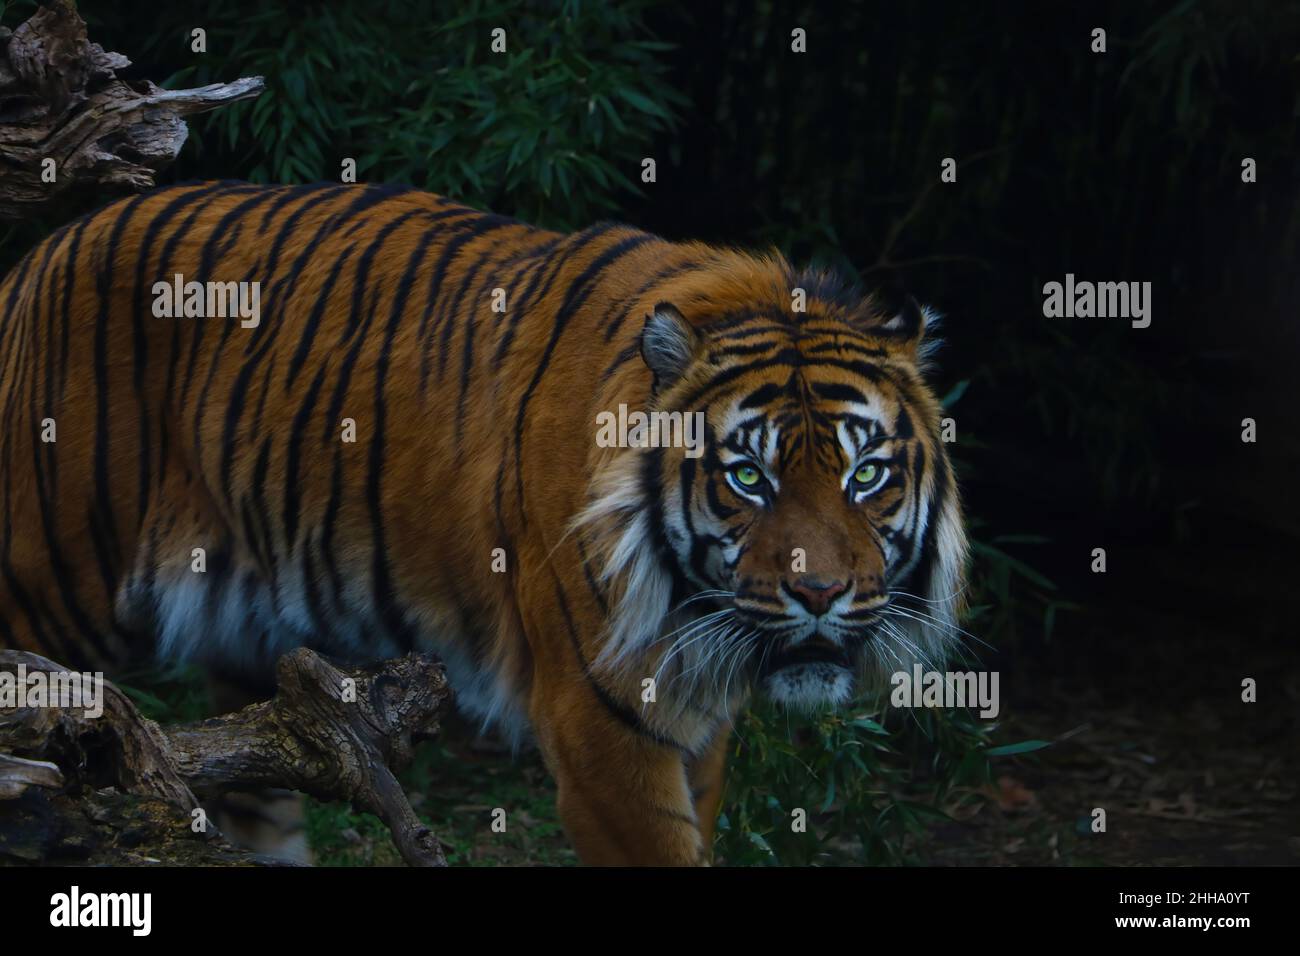 Out of focus. Close-up of an adult tiger in the green Stock Photo